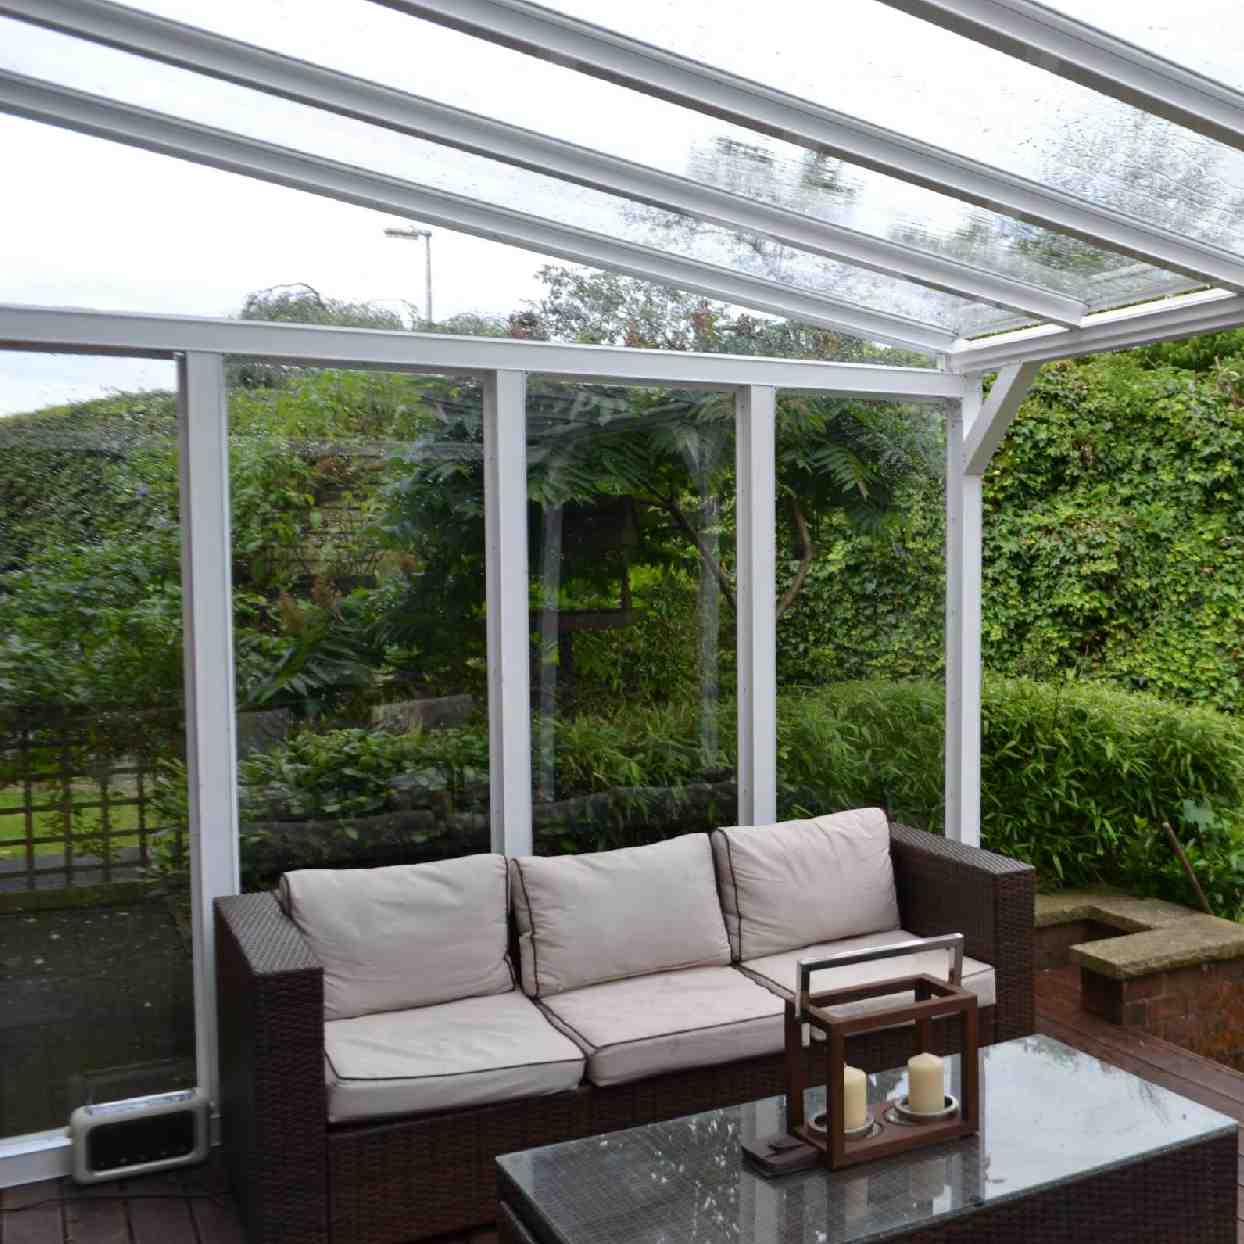 Buy Omega Verandah White with 16mm Polycarbonate Glazing - 7.0m (W) x 4.5m (P), (4) Supporting Posts online today